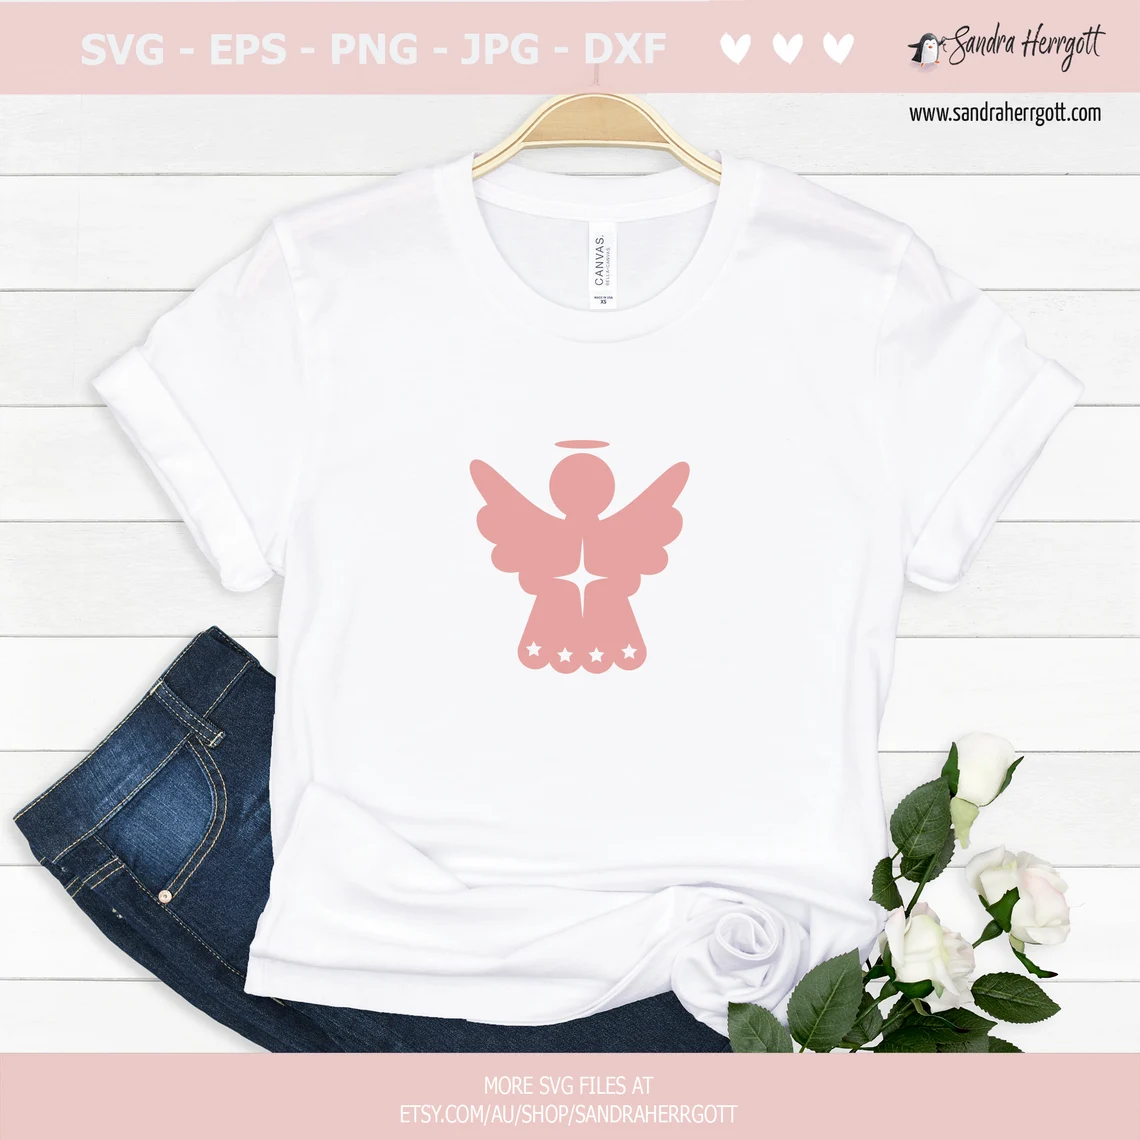 The image of an angel on a white T-shirt for women.